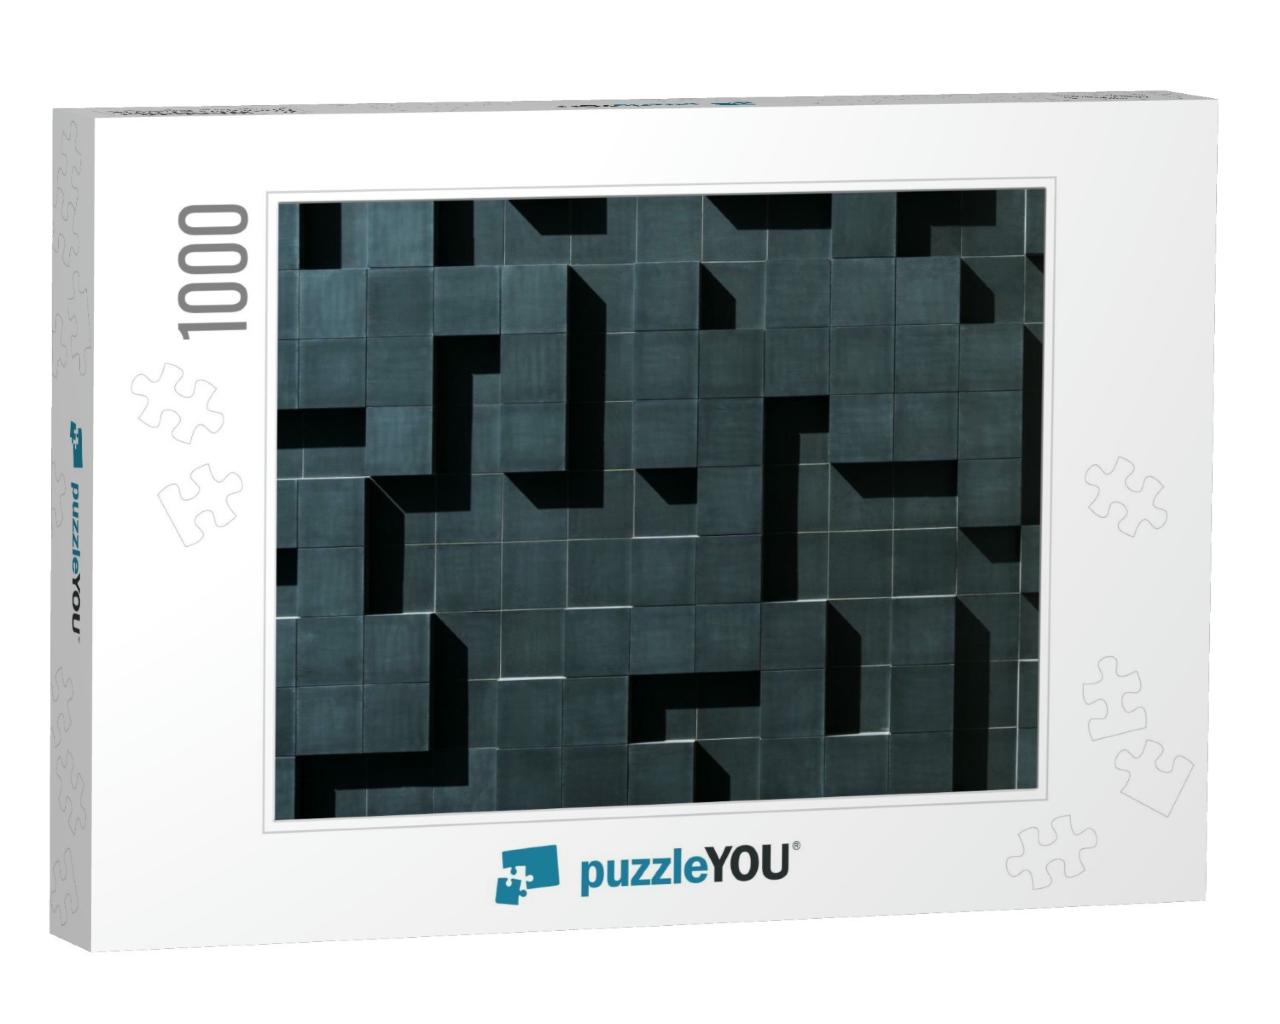 Black, tetrominos Like, Wall Made Up of Geometric Shapes. Int... Jigsaw Puzzle with 1000 pieces